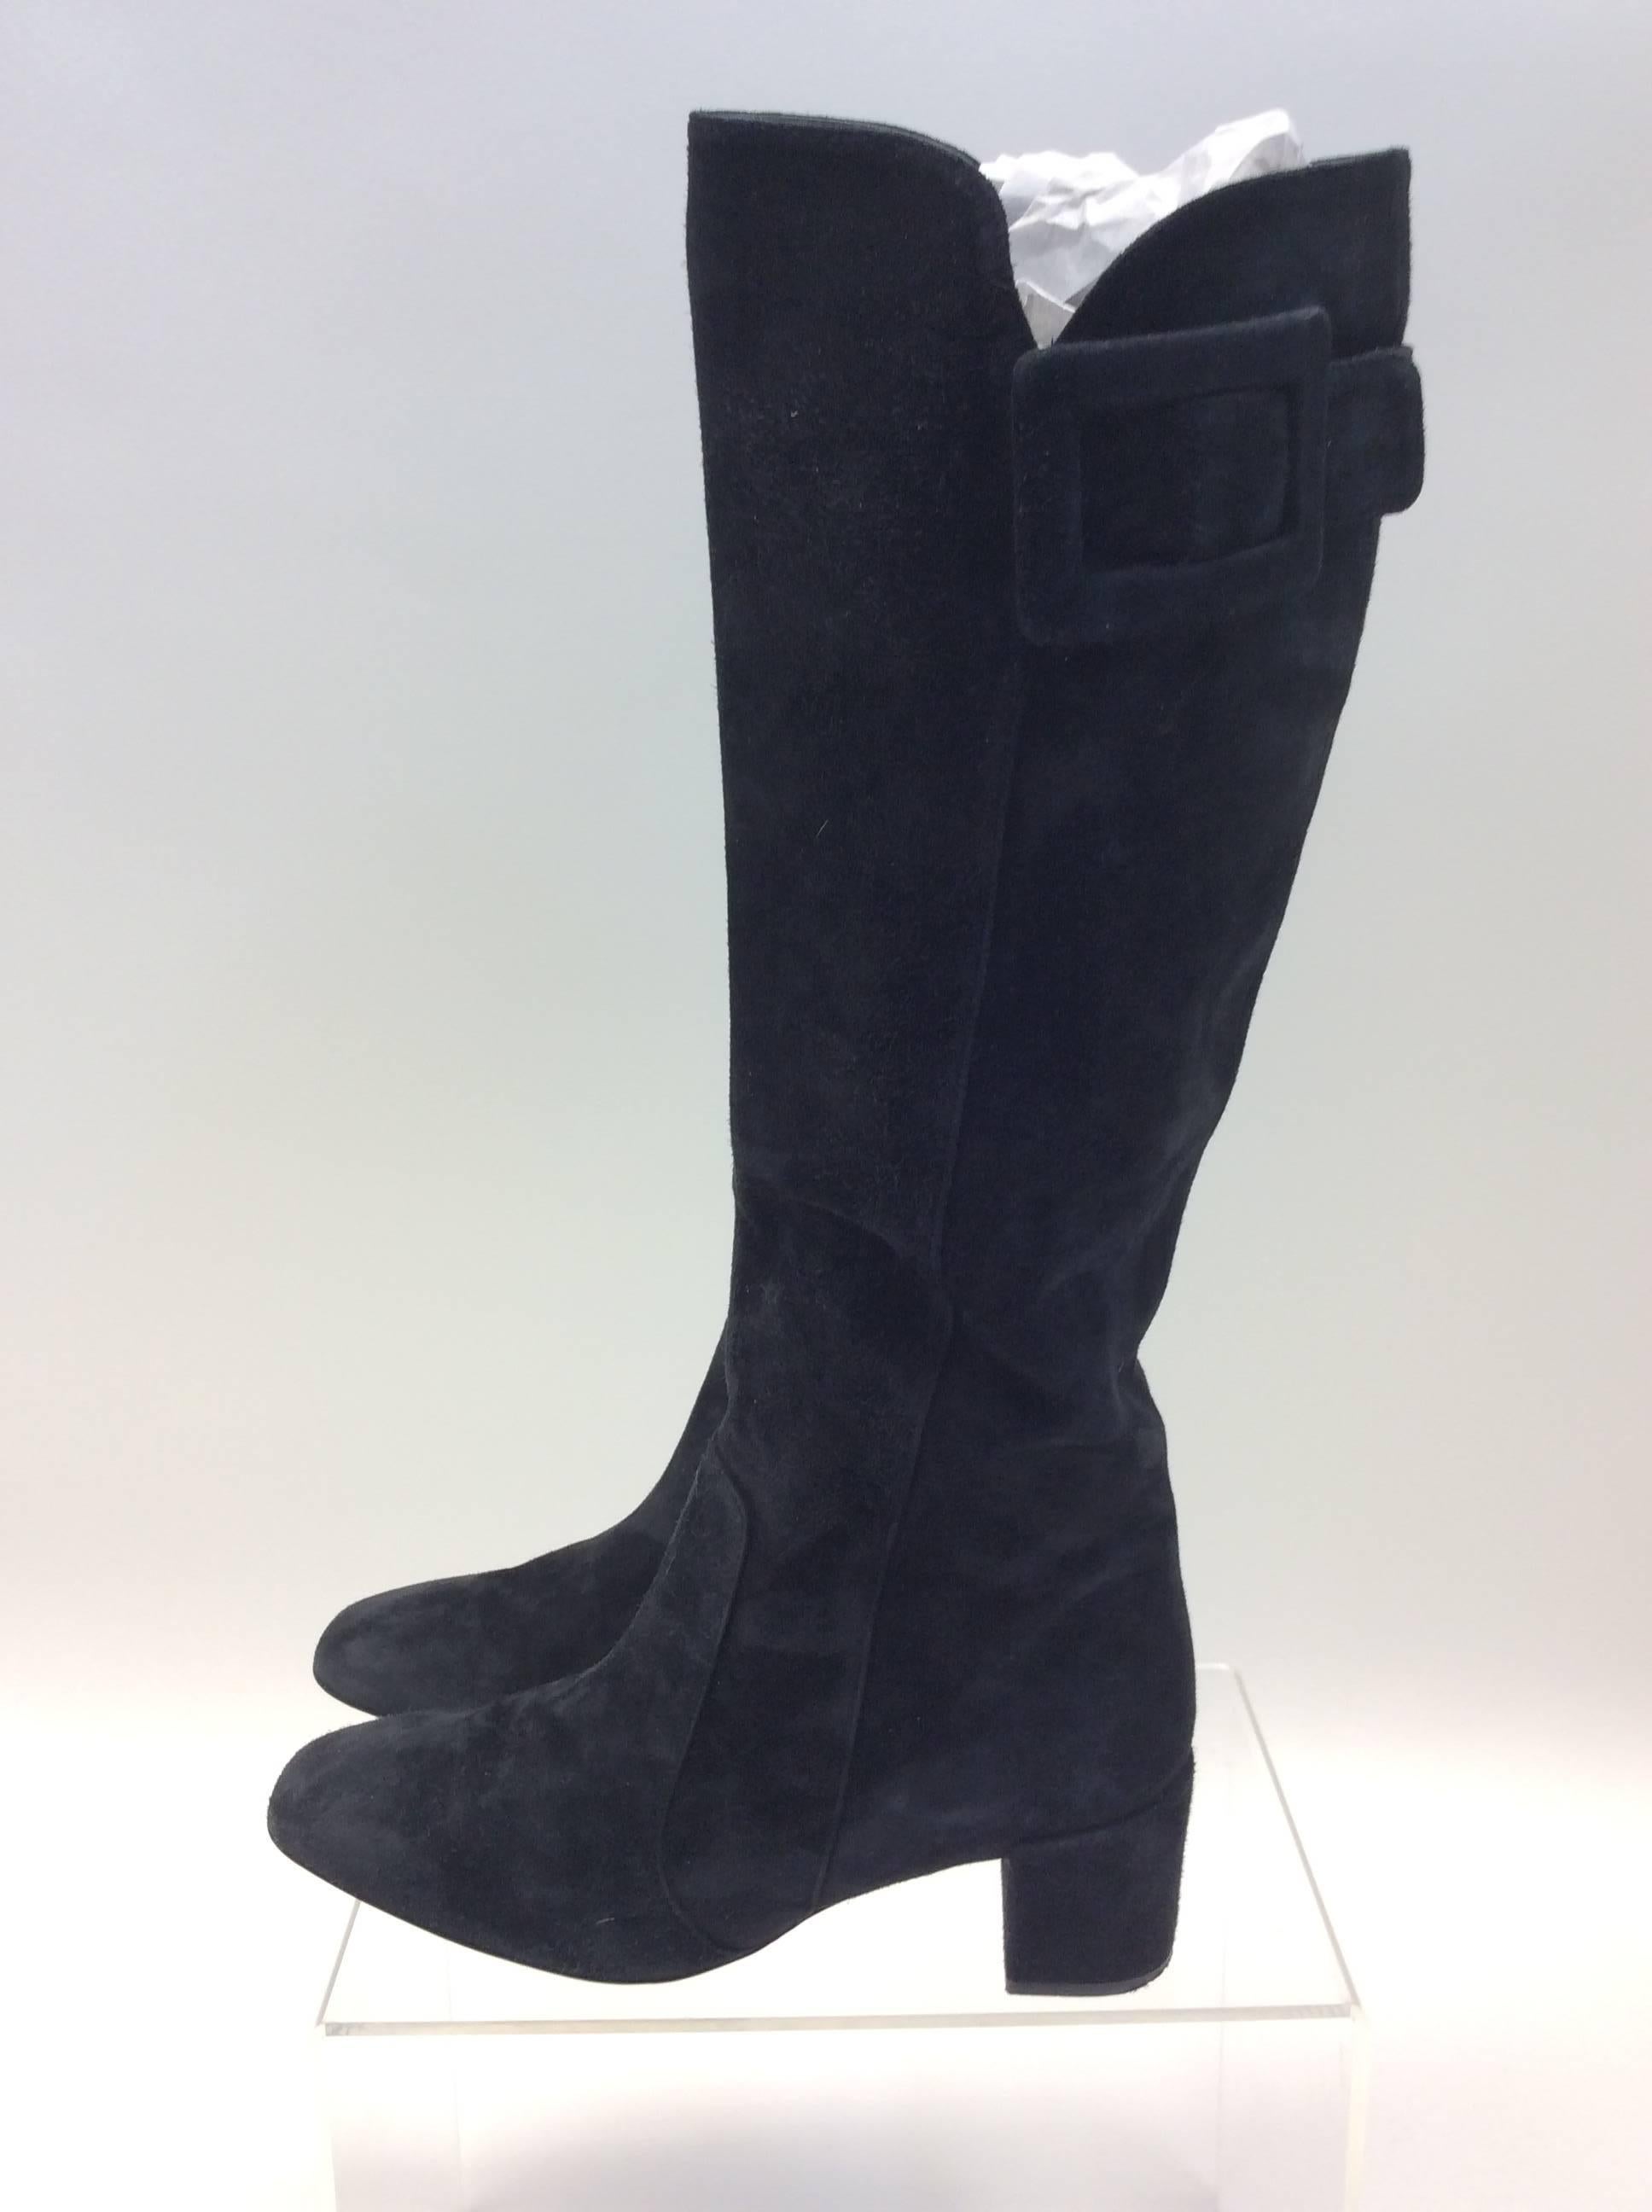 Roger Vivier Black Suede Boots
$250
Made in Italy
Size 35
2” Heel
15” Tall
